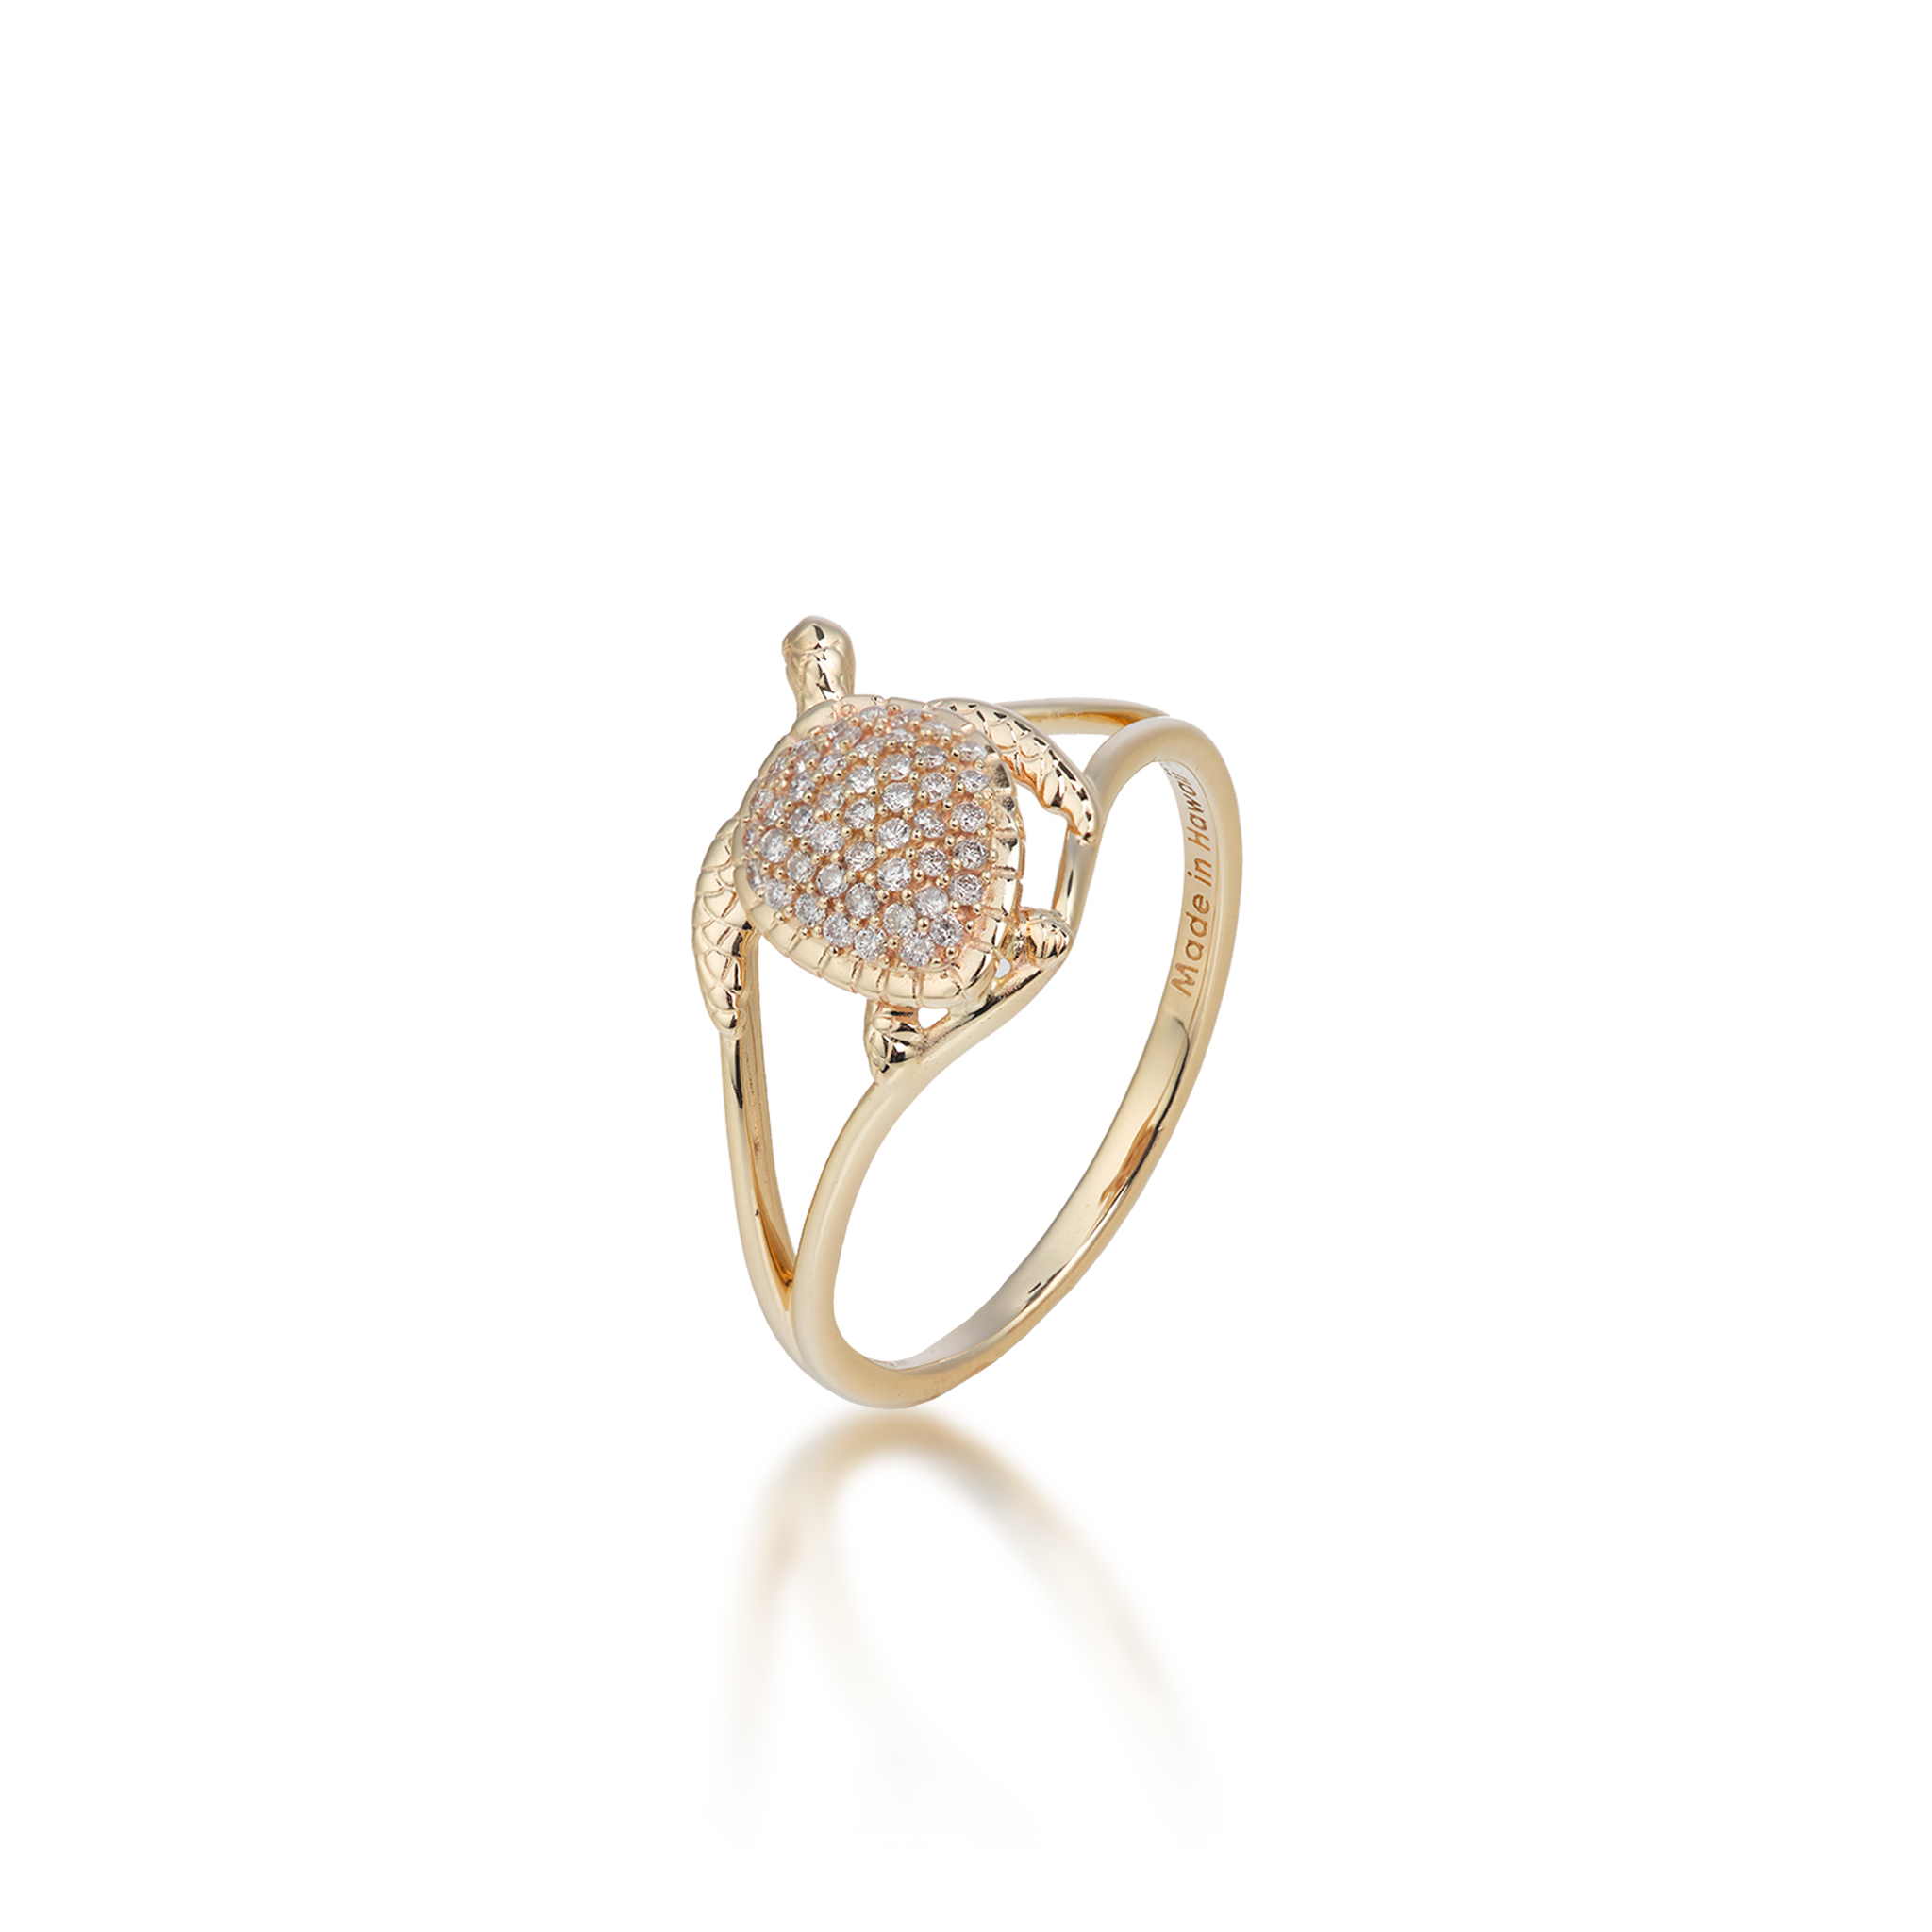 Honu Ring in Gold with Diamonds - 13mm